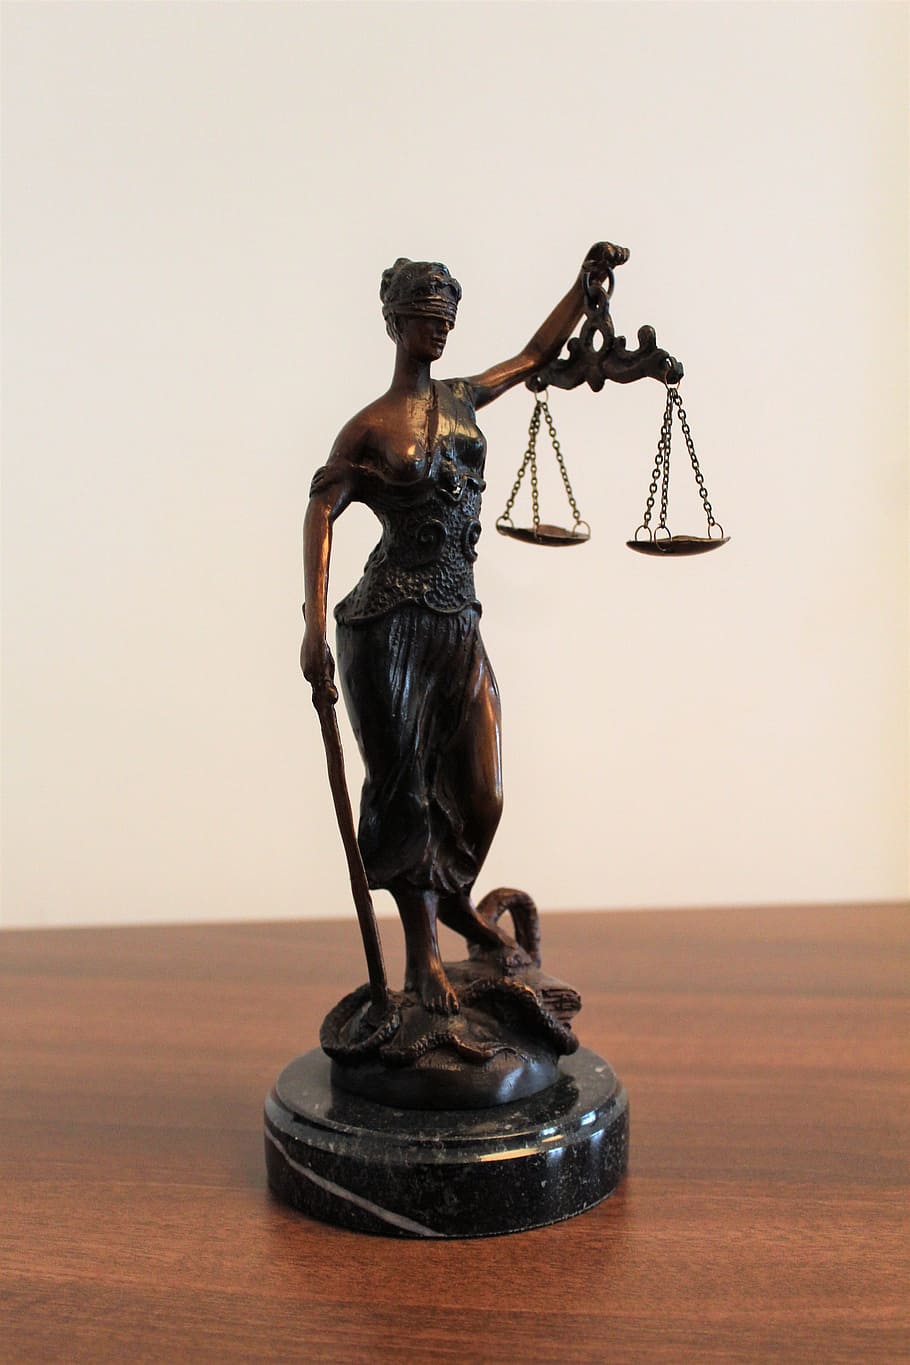 person, holding, balance scale figurine, brown, wooden, surface, justitia, justice, blindness, horizontal